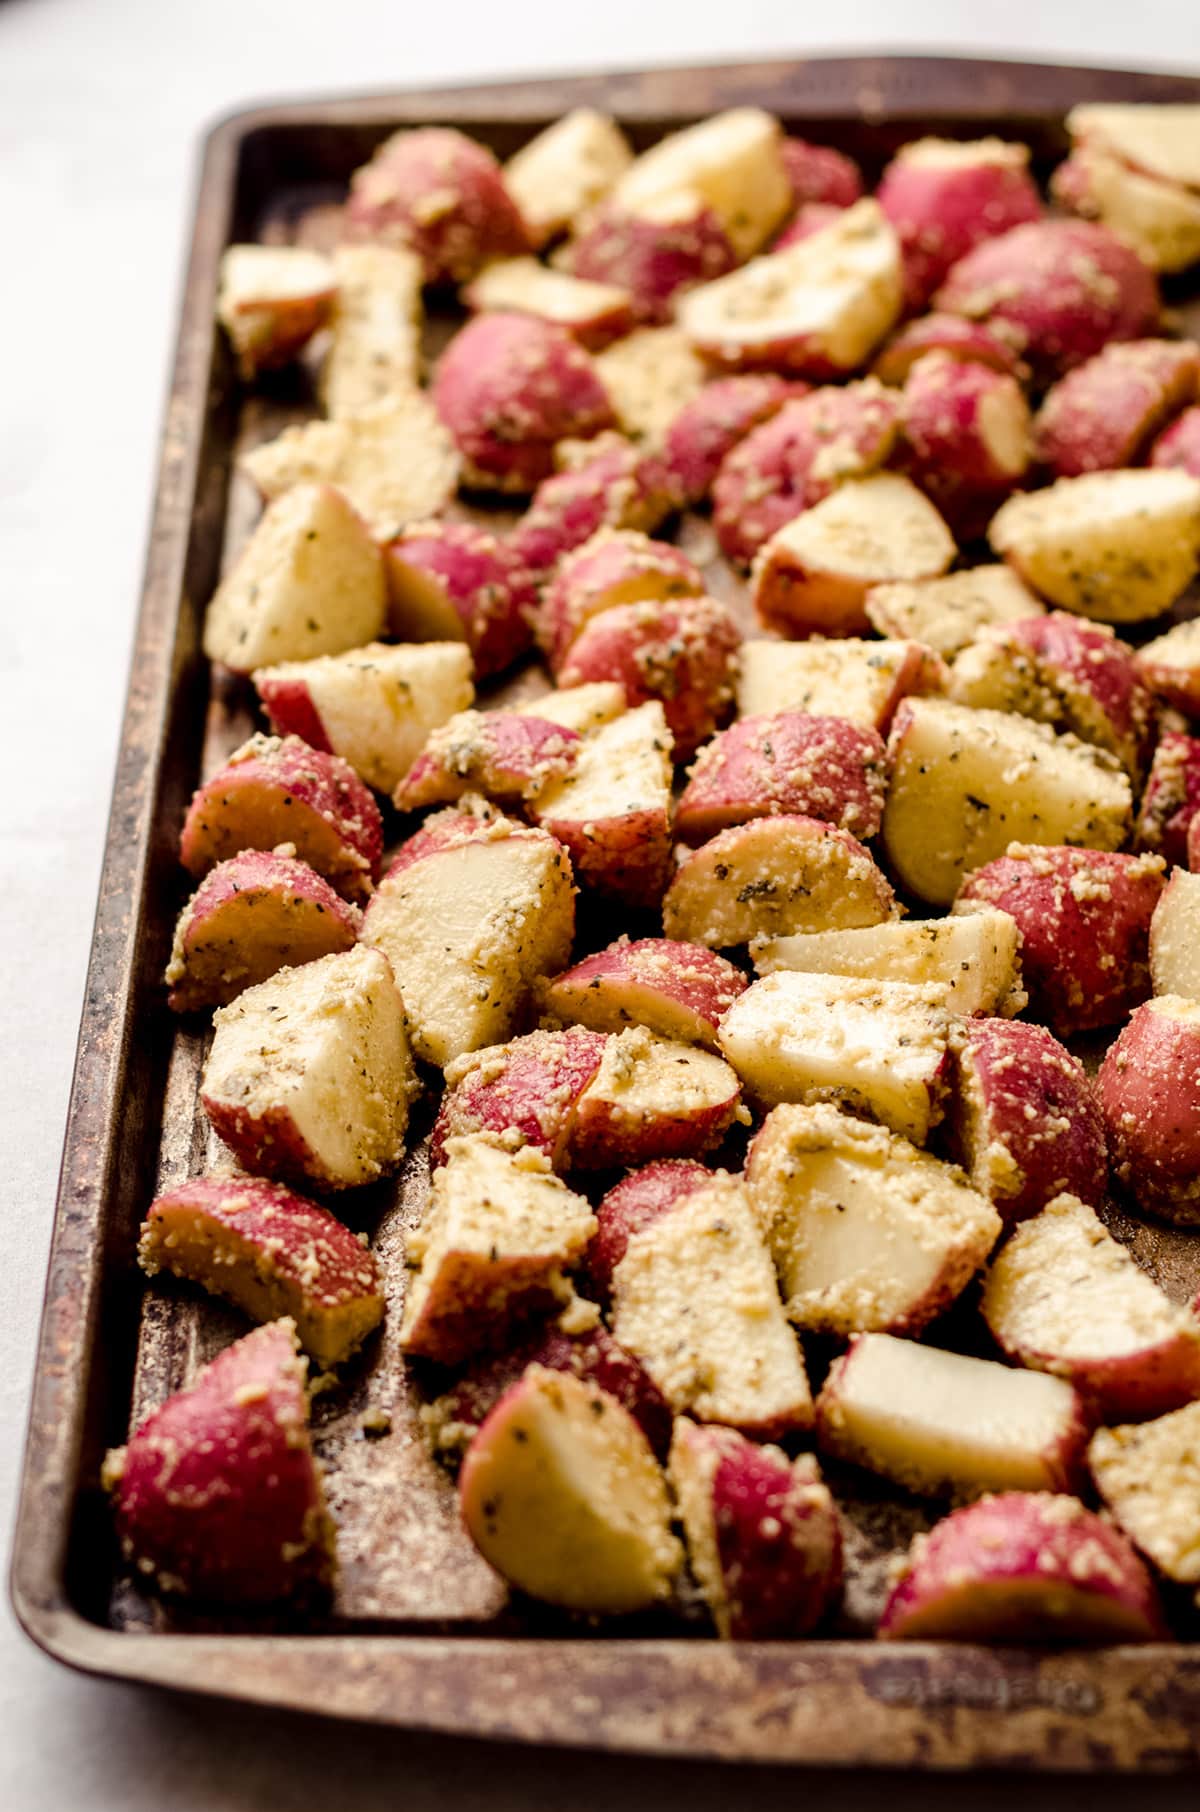 red potatoes on a baking sheet rubbed with cheese and herbs